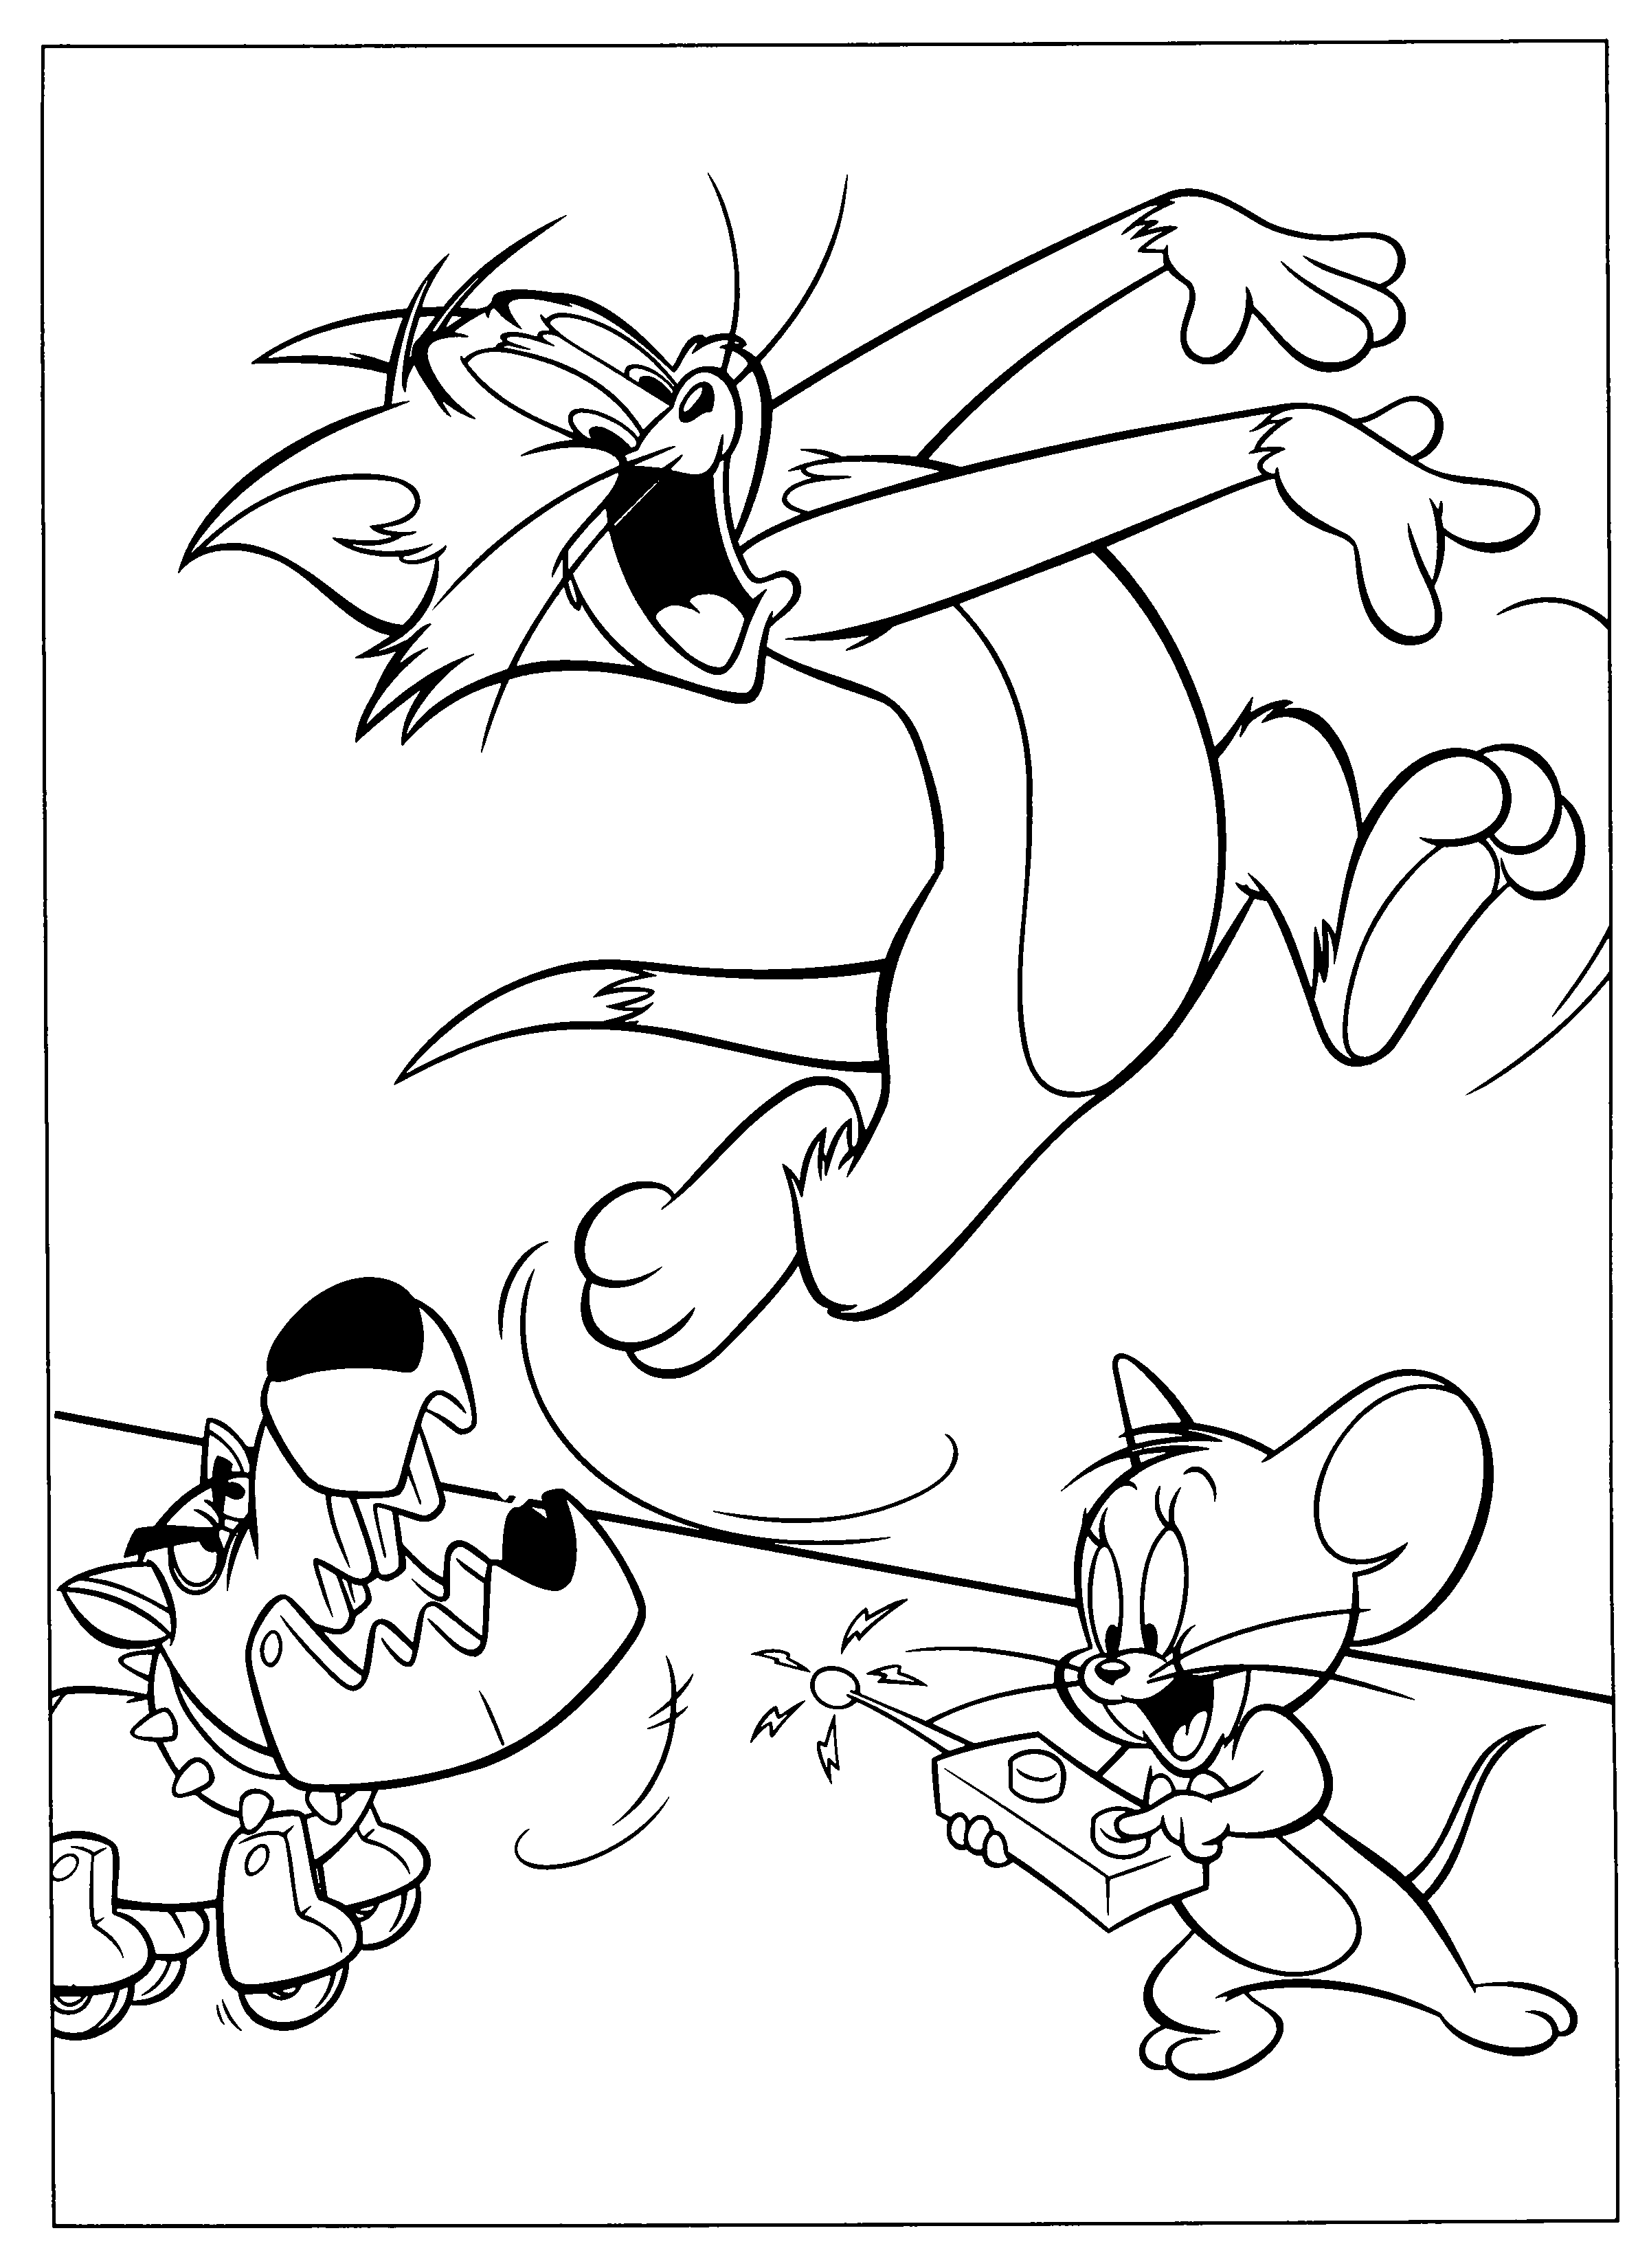 Drawing Tom and Jerry #24211 (Cartoons) – Printable coloring pages